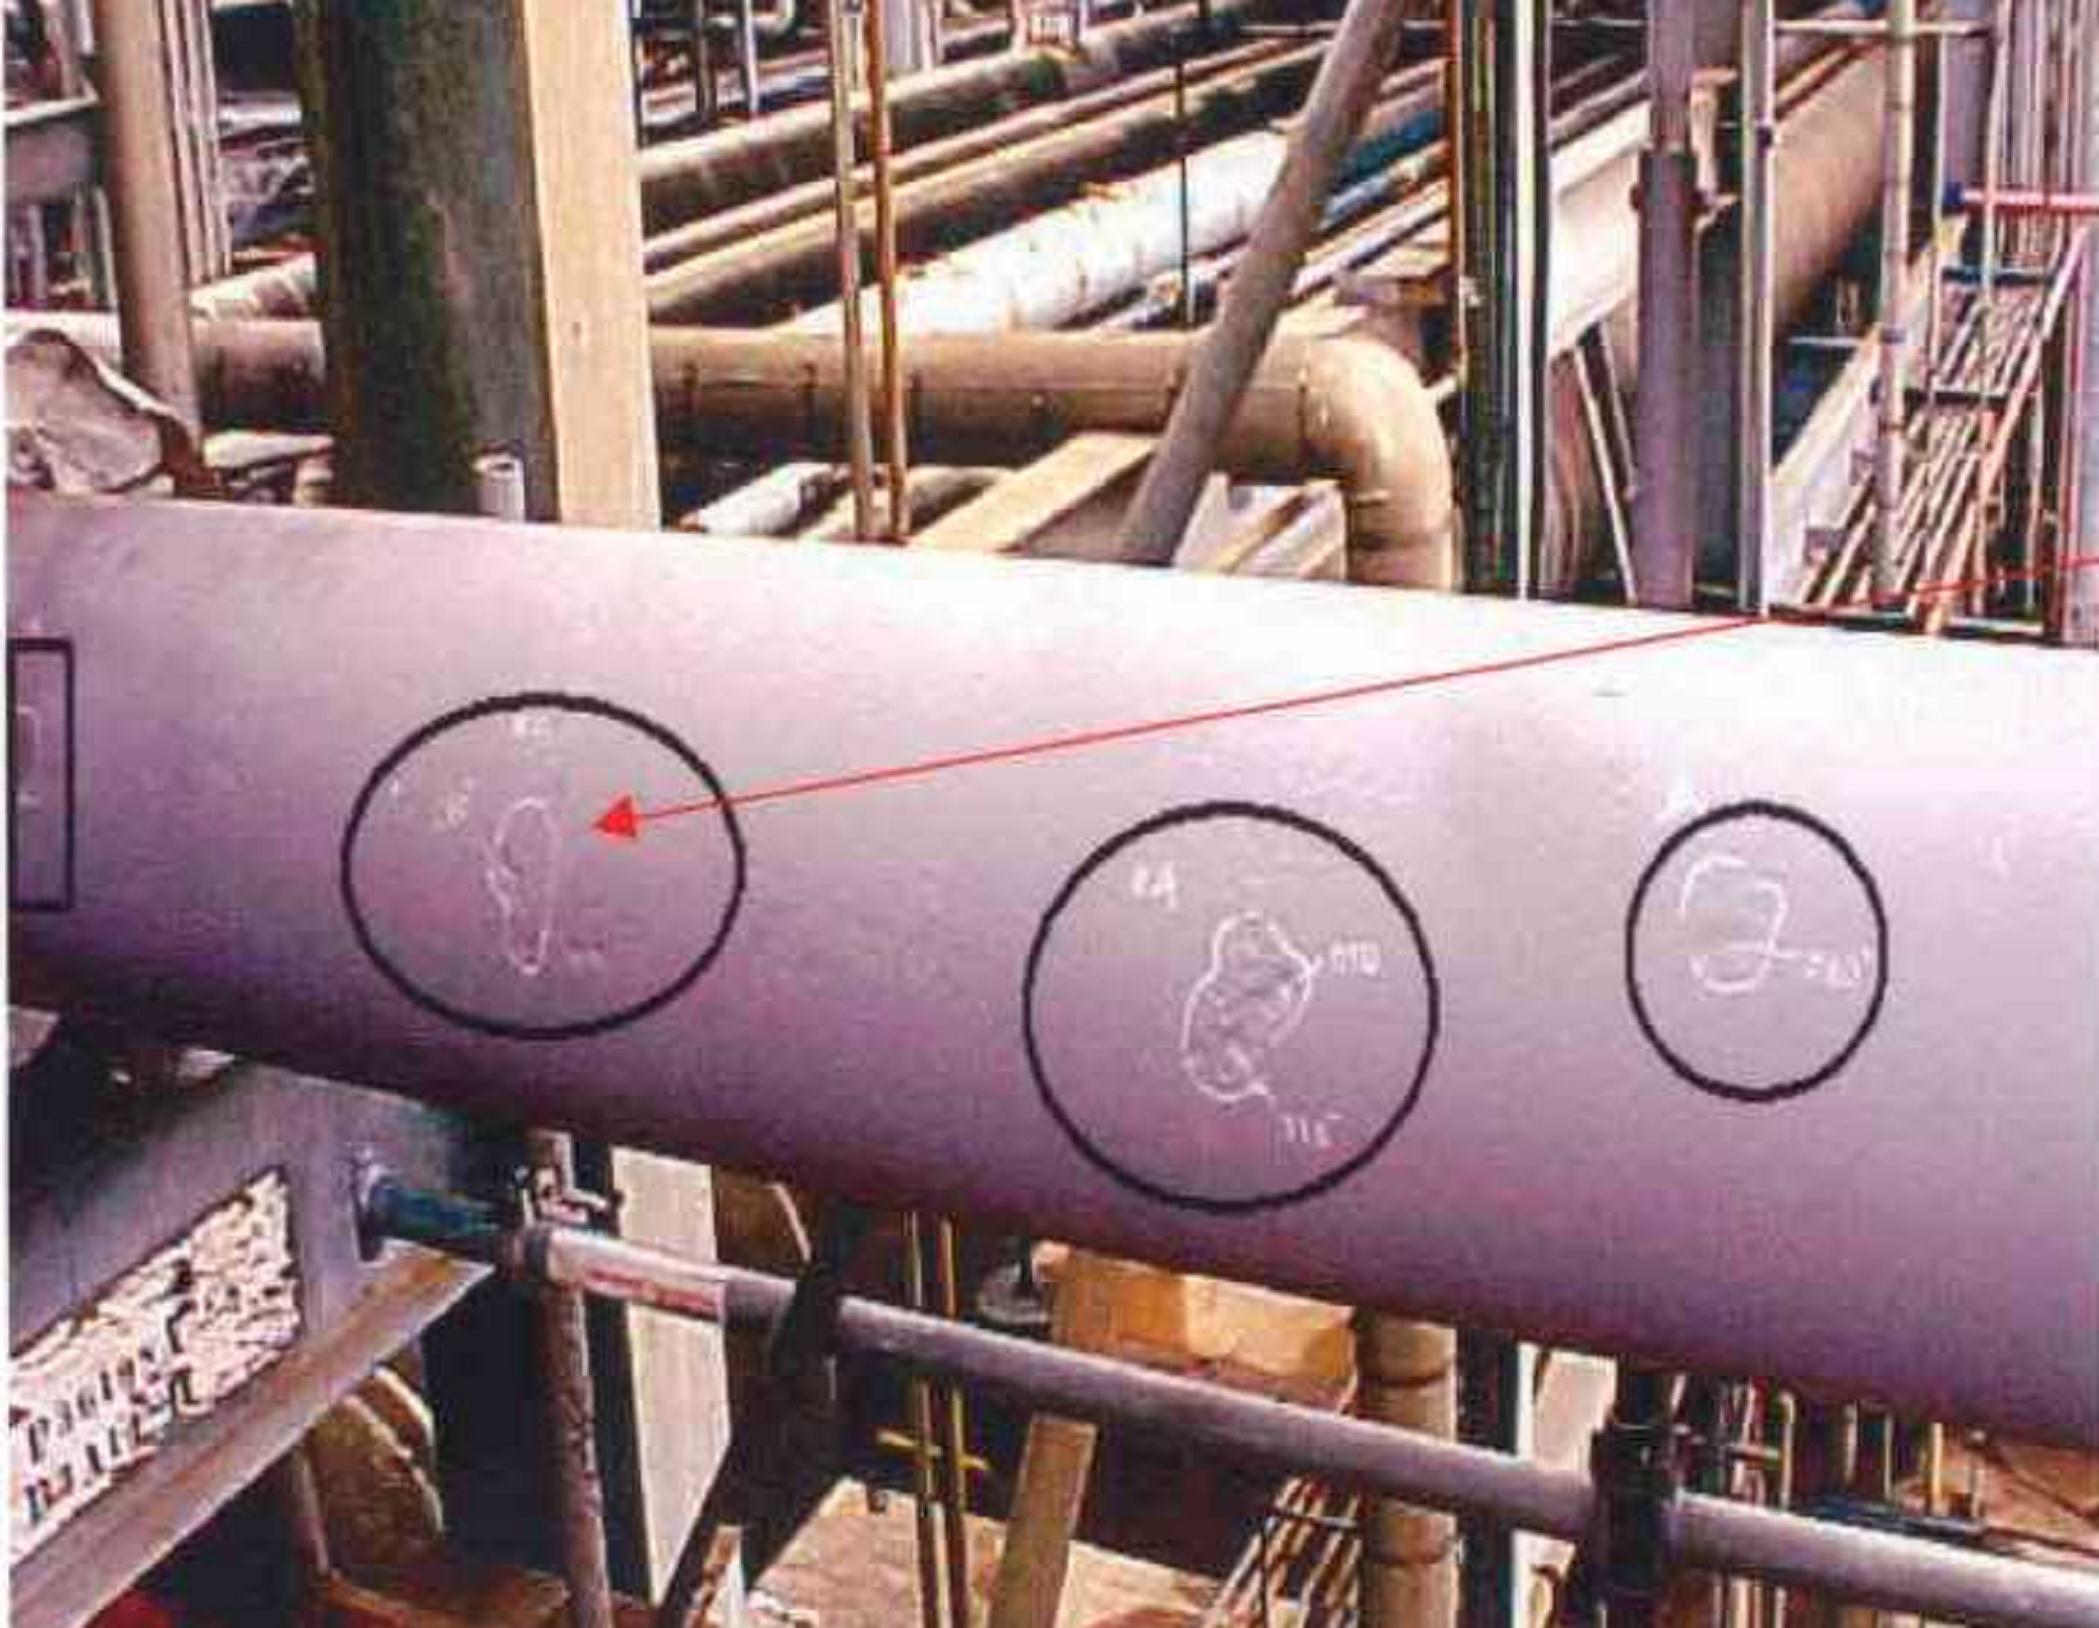 Inspection of a 14 inch ammonia line b)